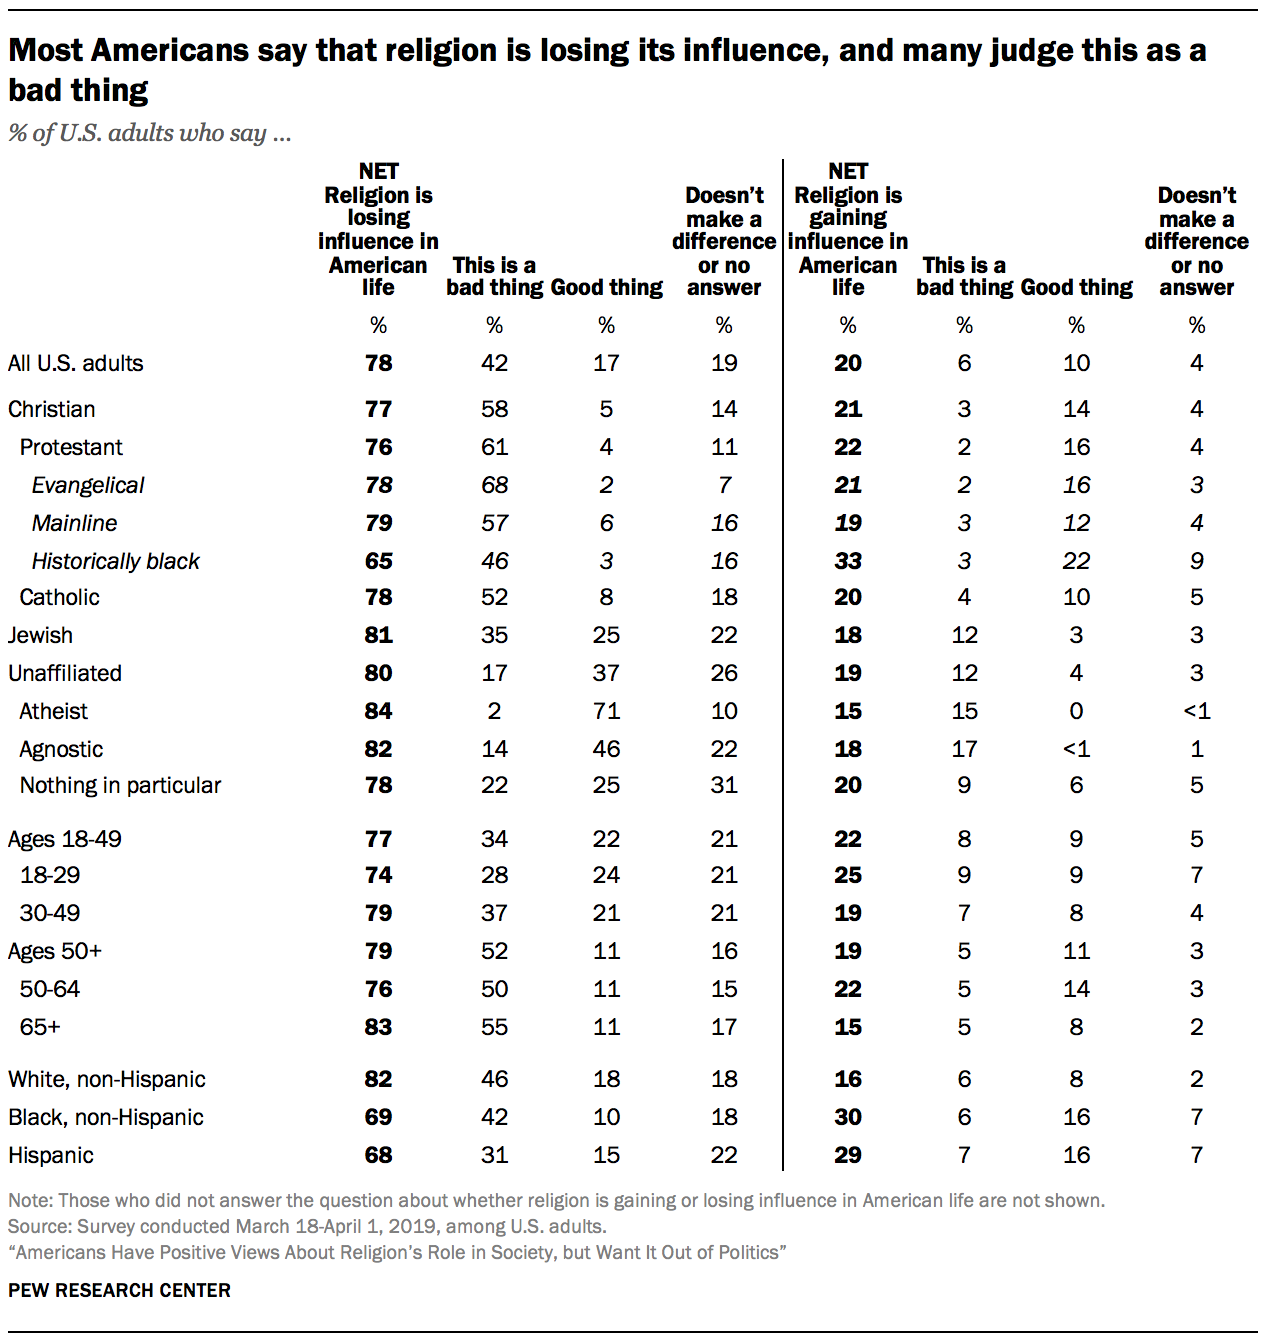 Most Americans say that religion is losing its influence, and many judge this as a bad thing